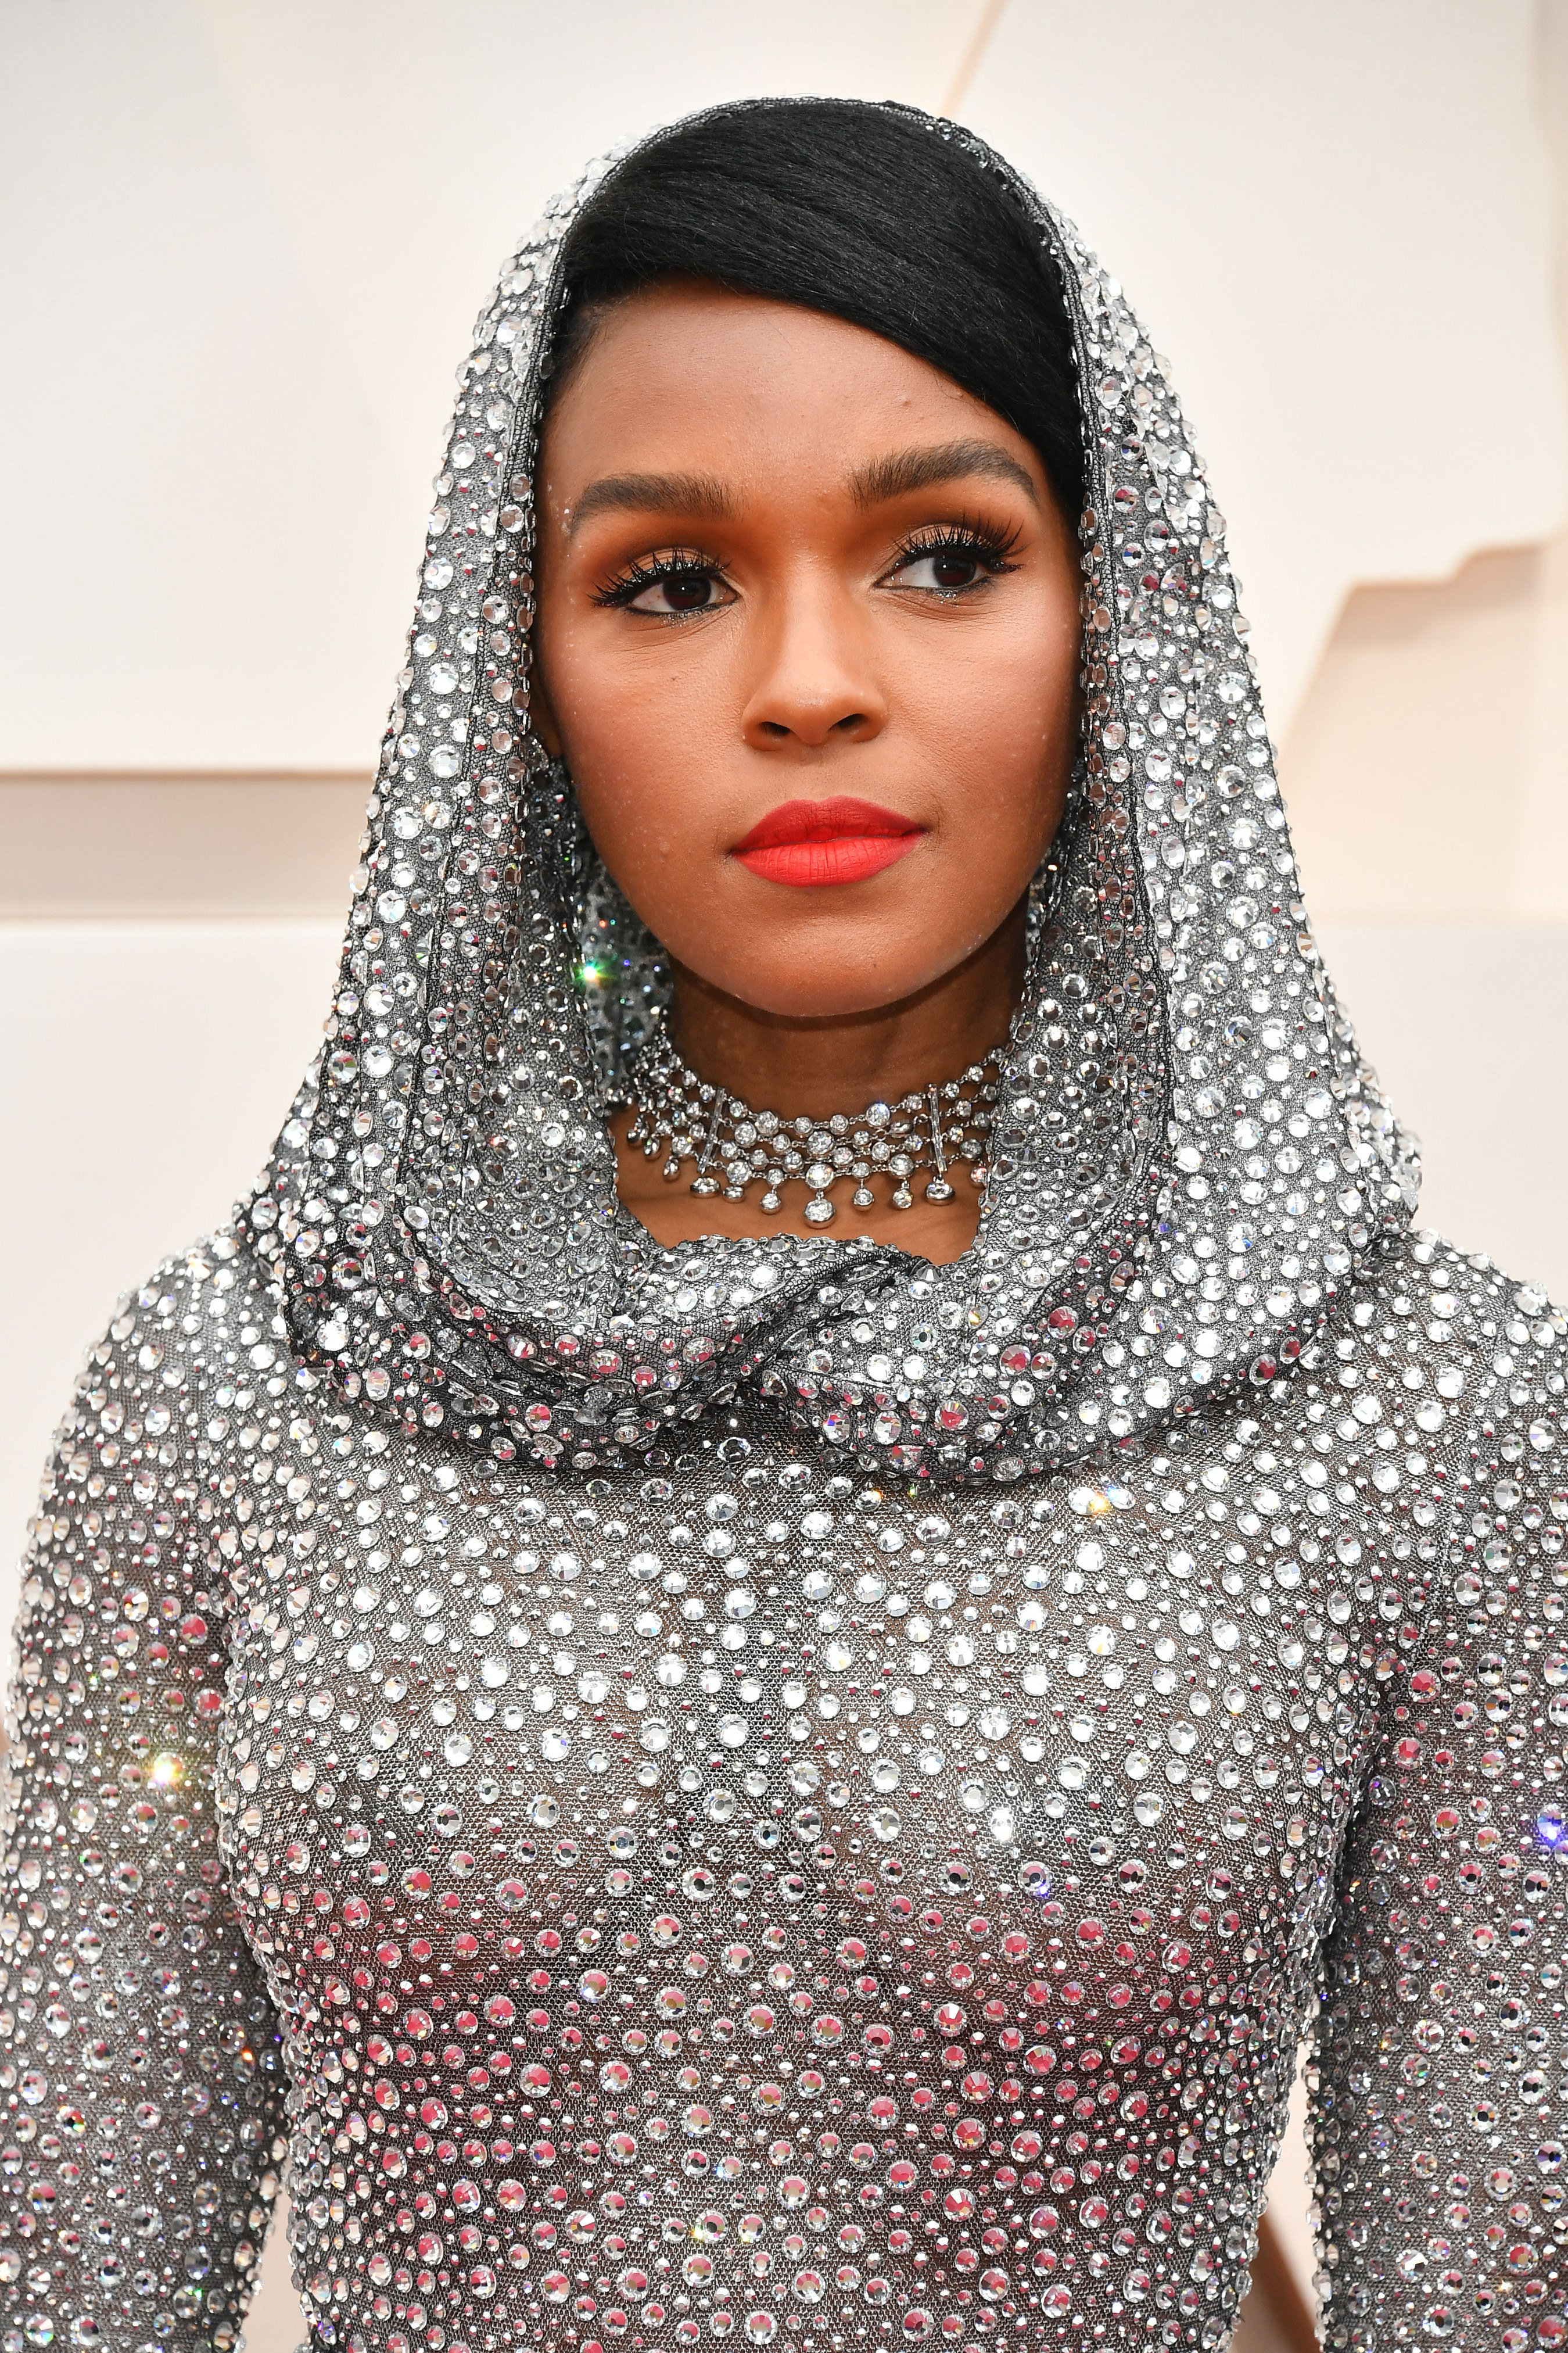 Janelle Monáe at the 92nd annual Academy Awards